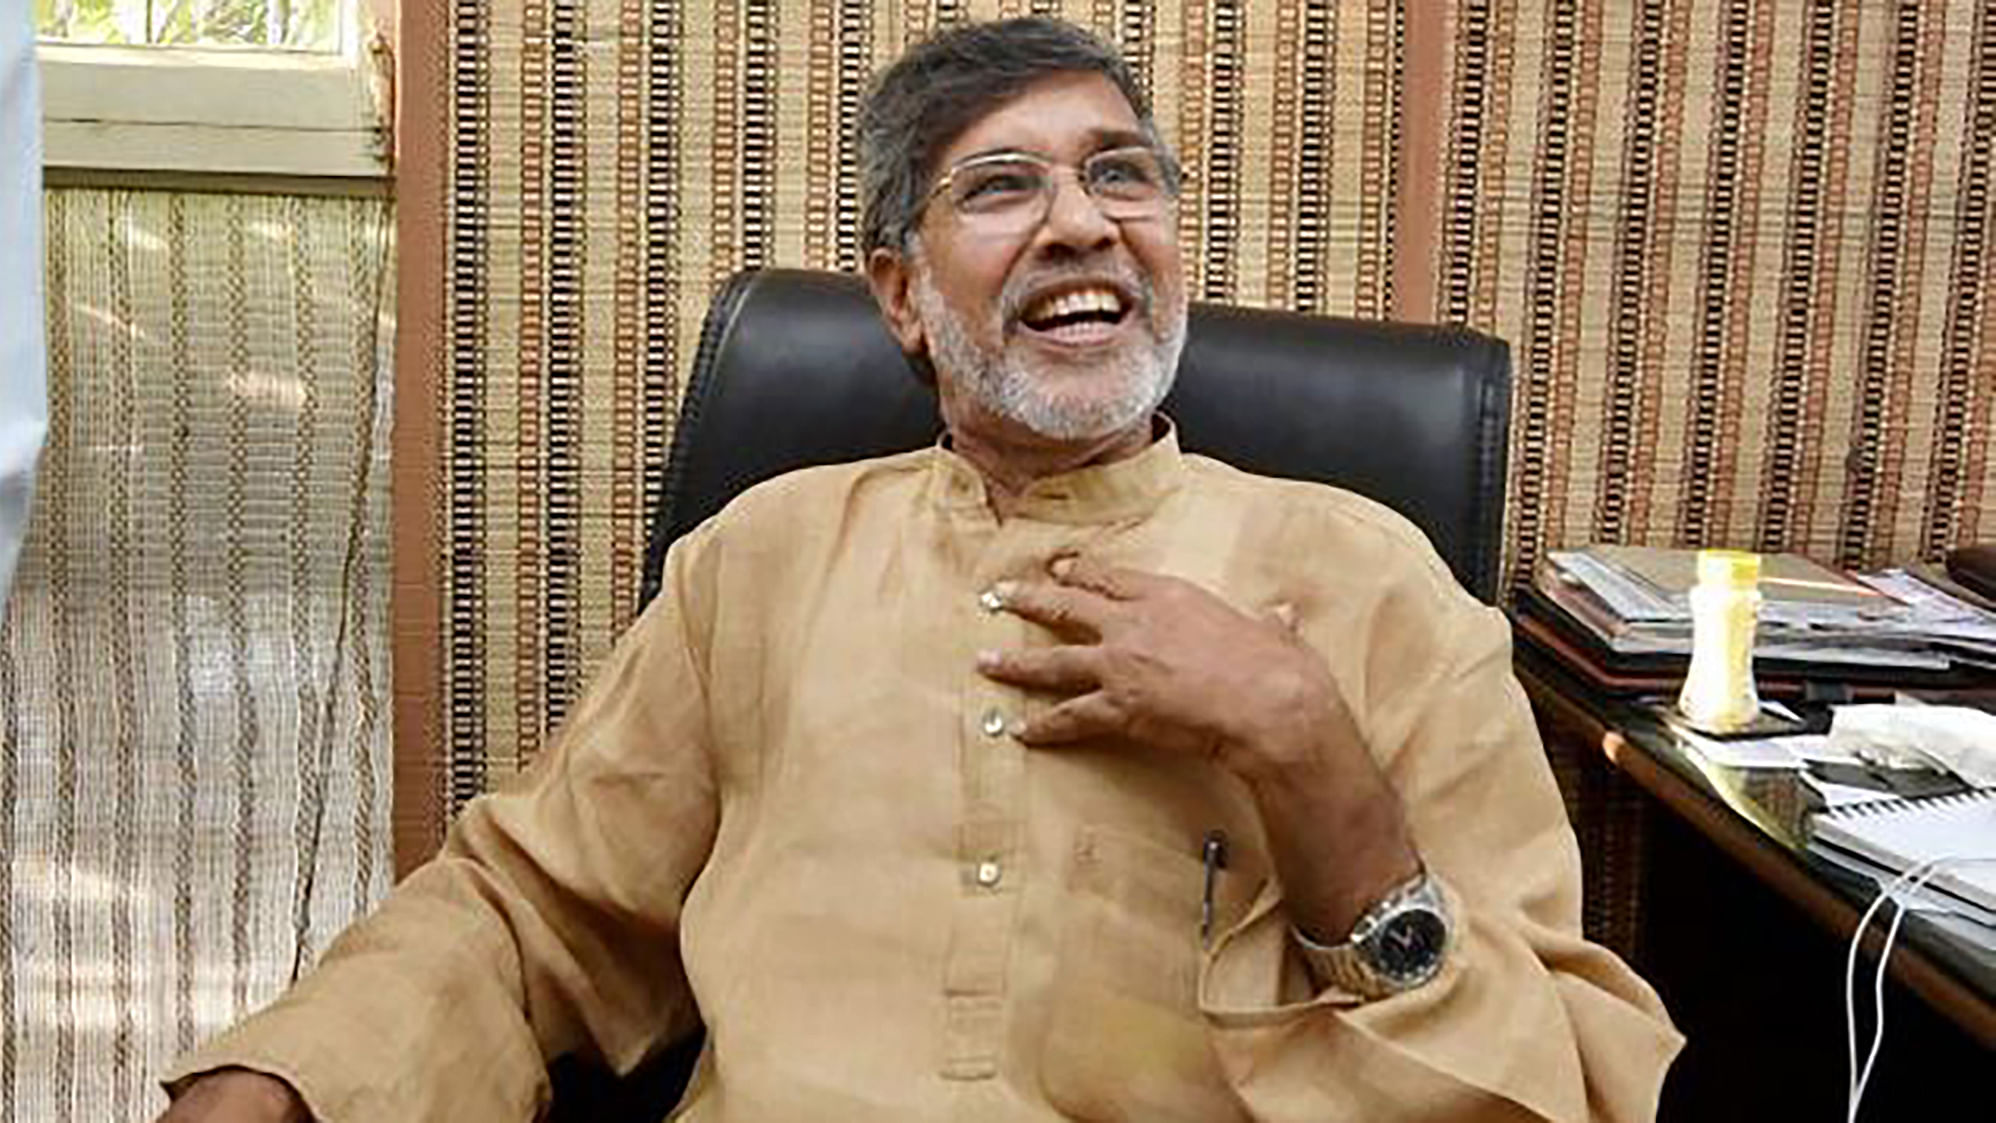 Satyarthi was awarded the prize for his organisation Bachpan Bachao Andolan, which has rehabilitated 80,000 kids. (Photo: PTI)